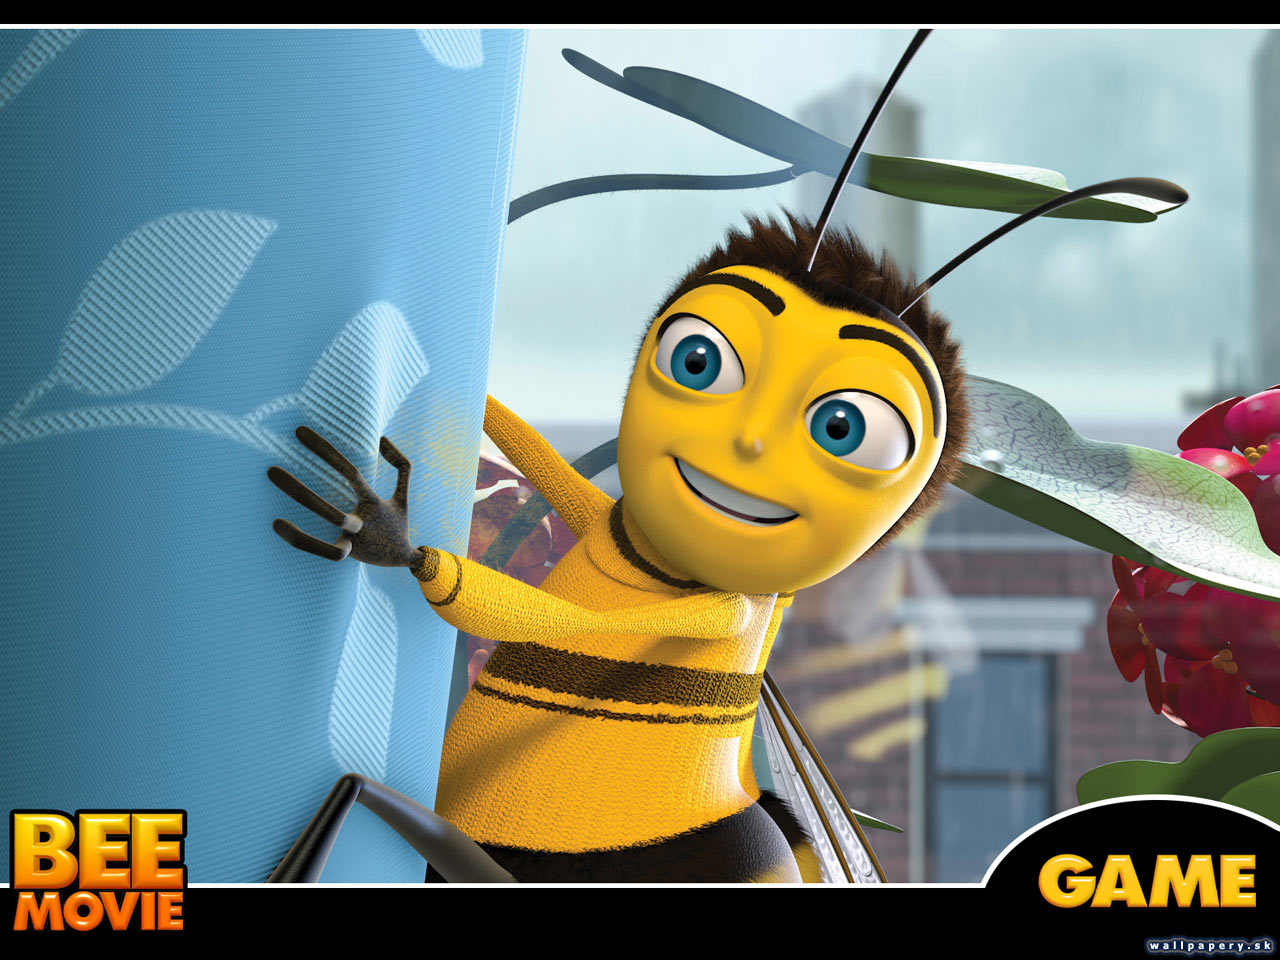 Bee Movie Game - wallpaper 1